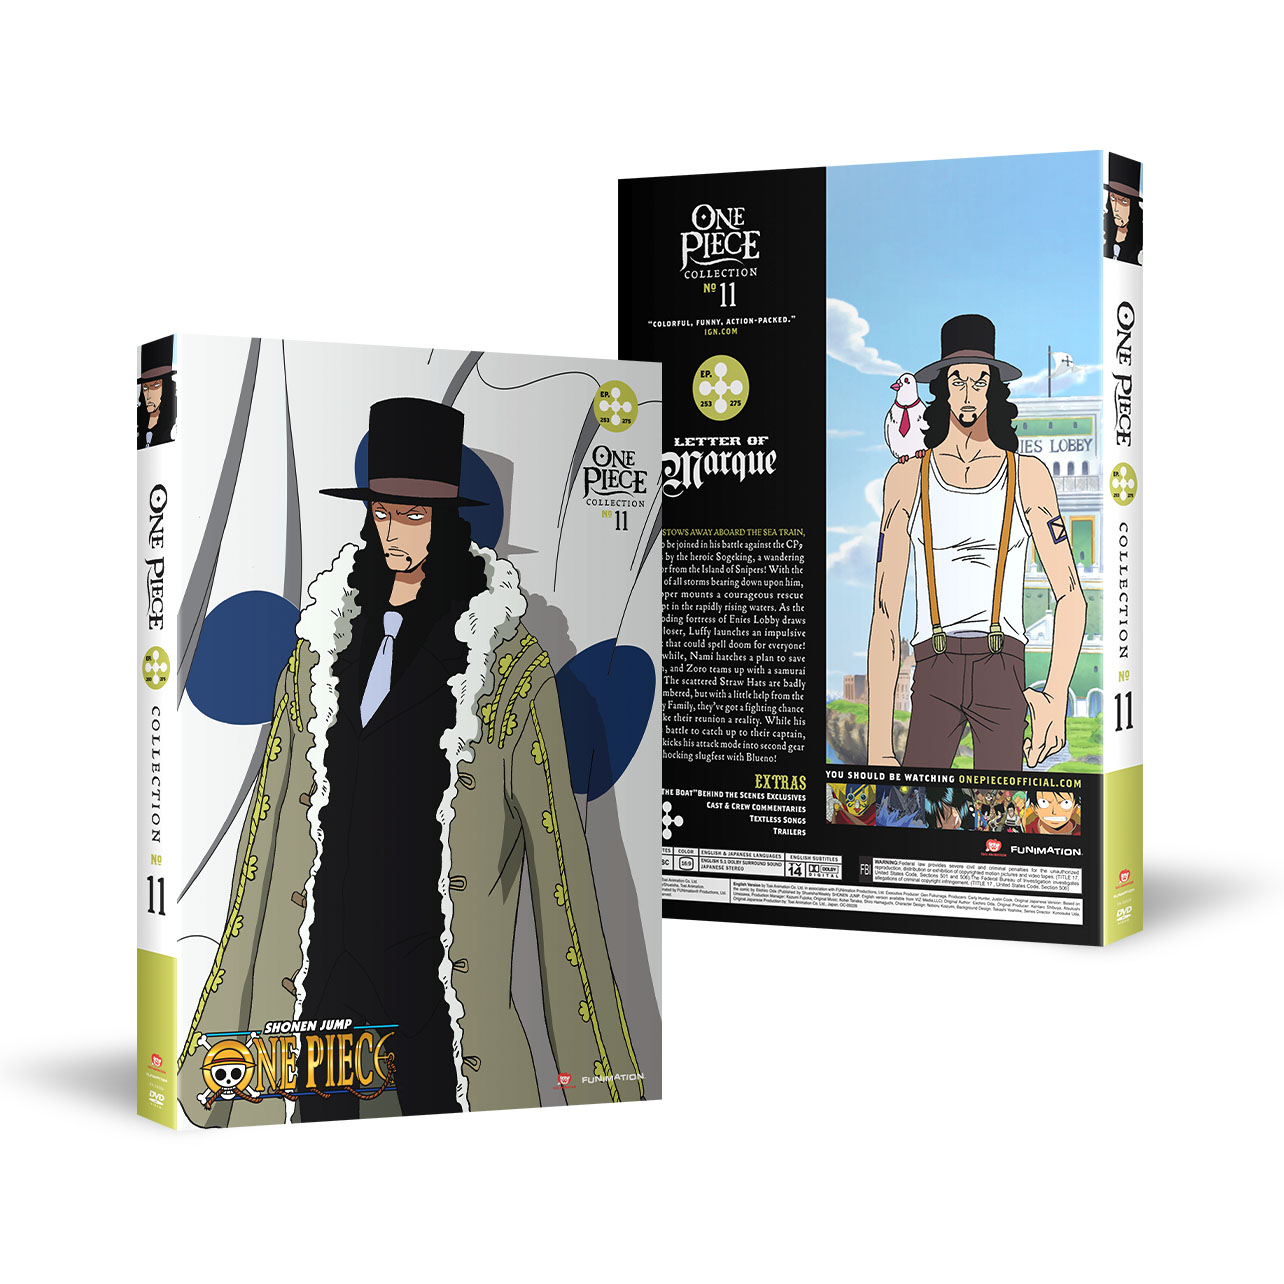 One Piece - Collection 11 - DVD image count 0